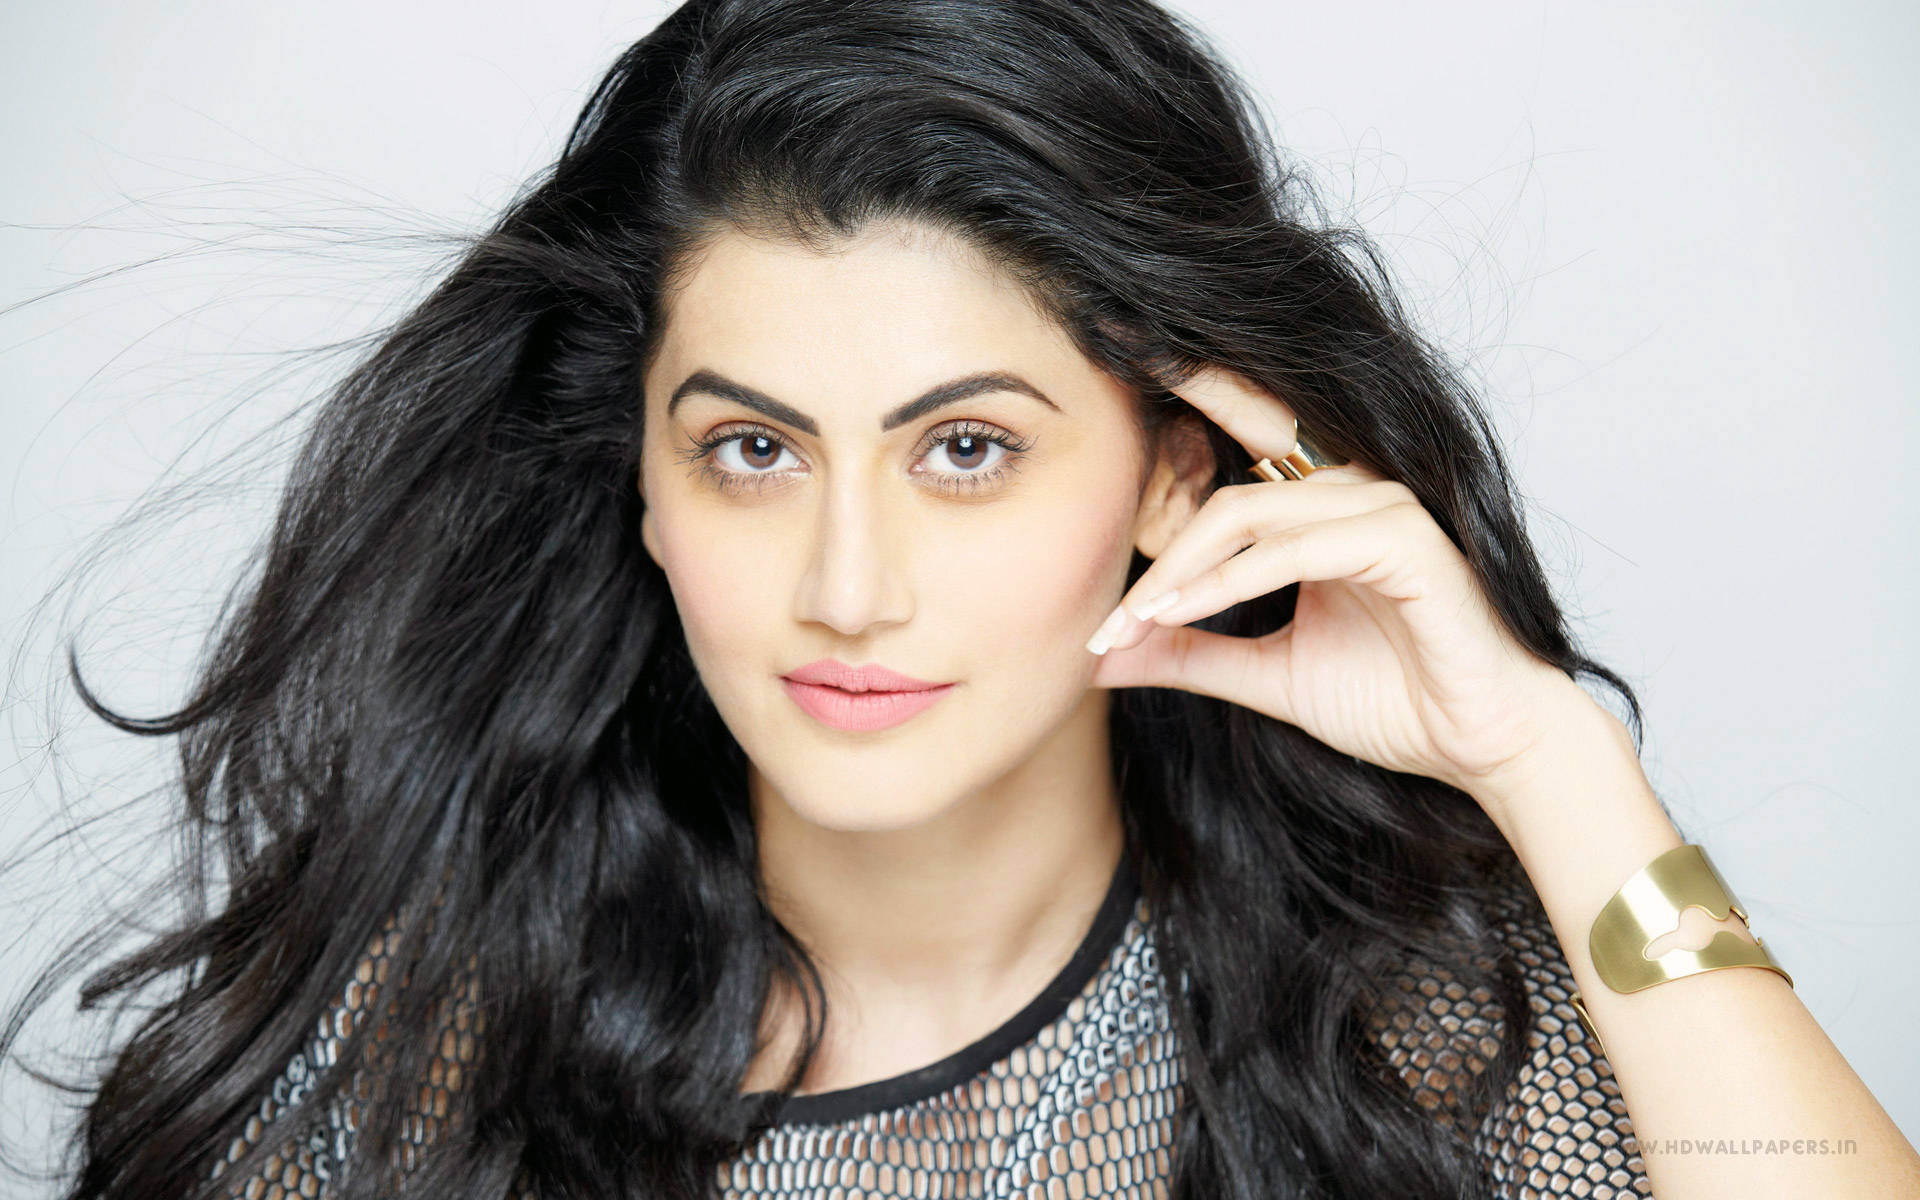 Lovely Bollywood Actress Taapsee Pannu Wallpaper